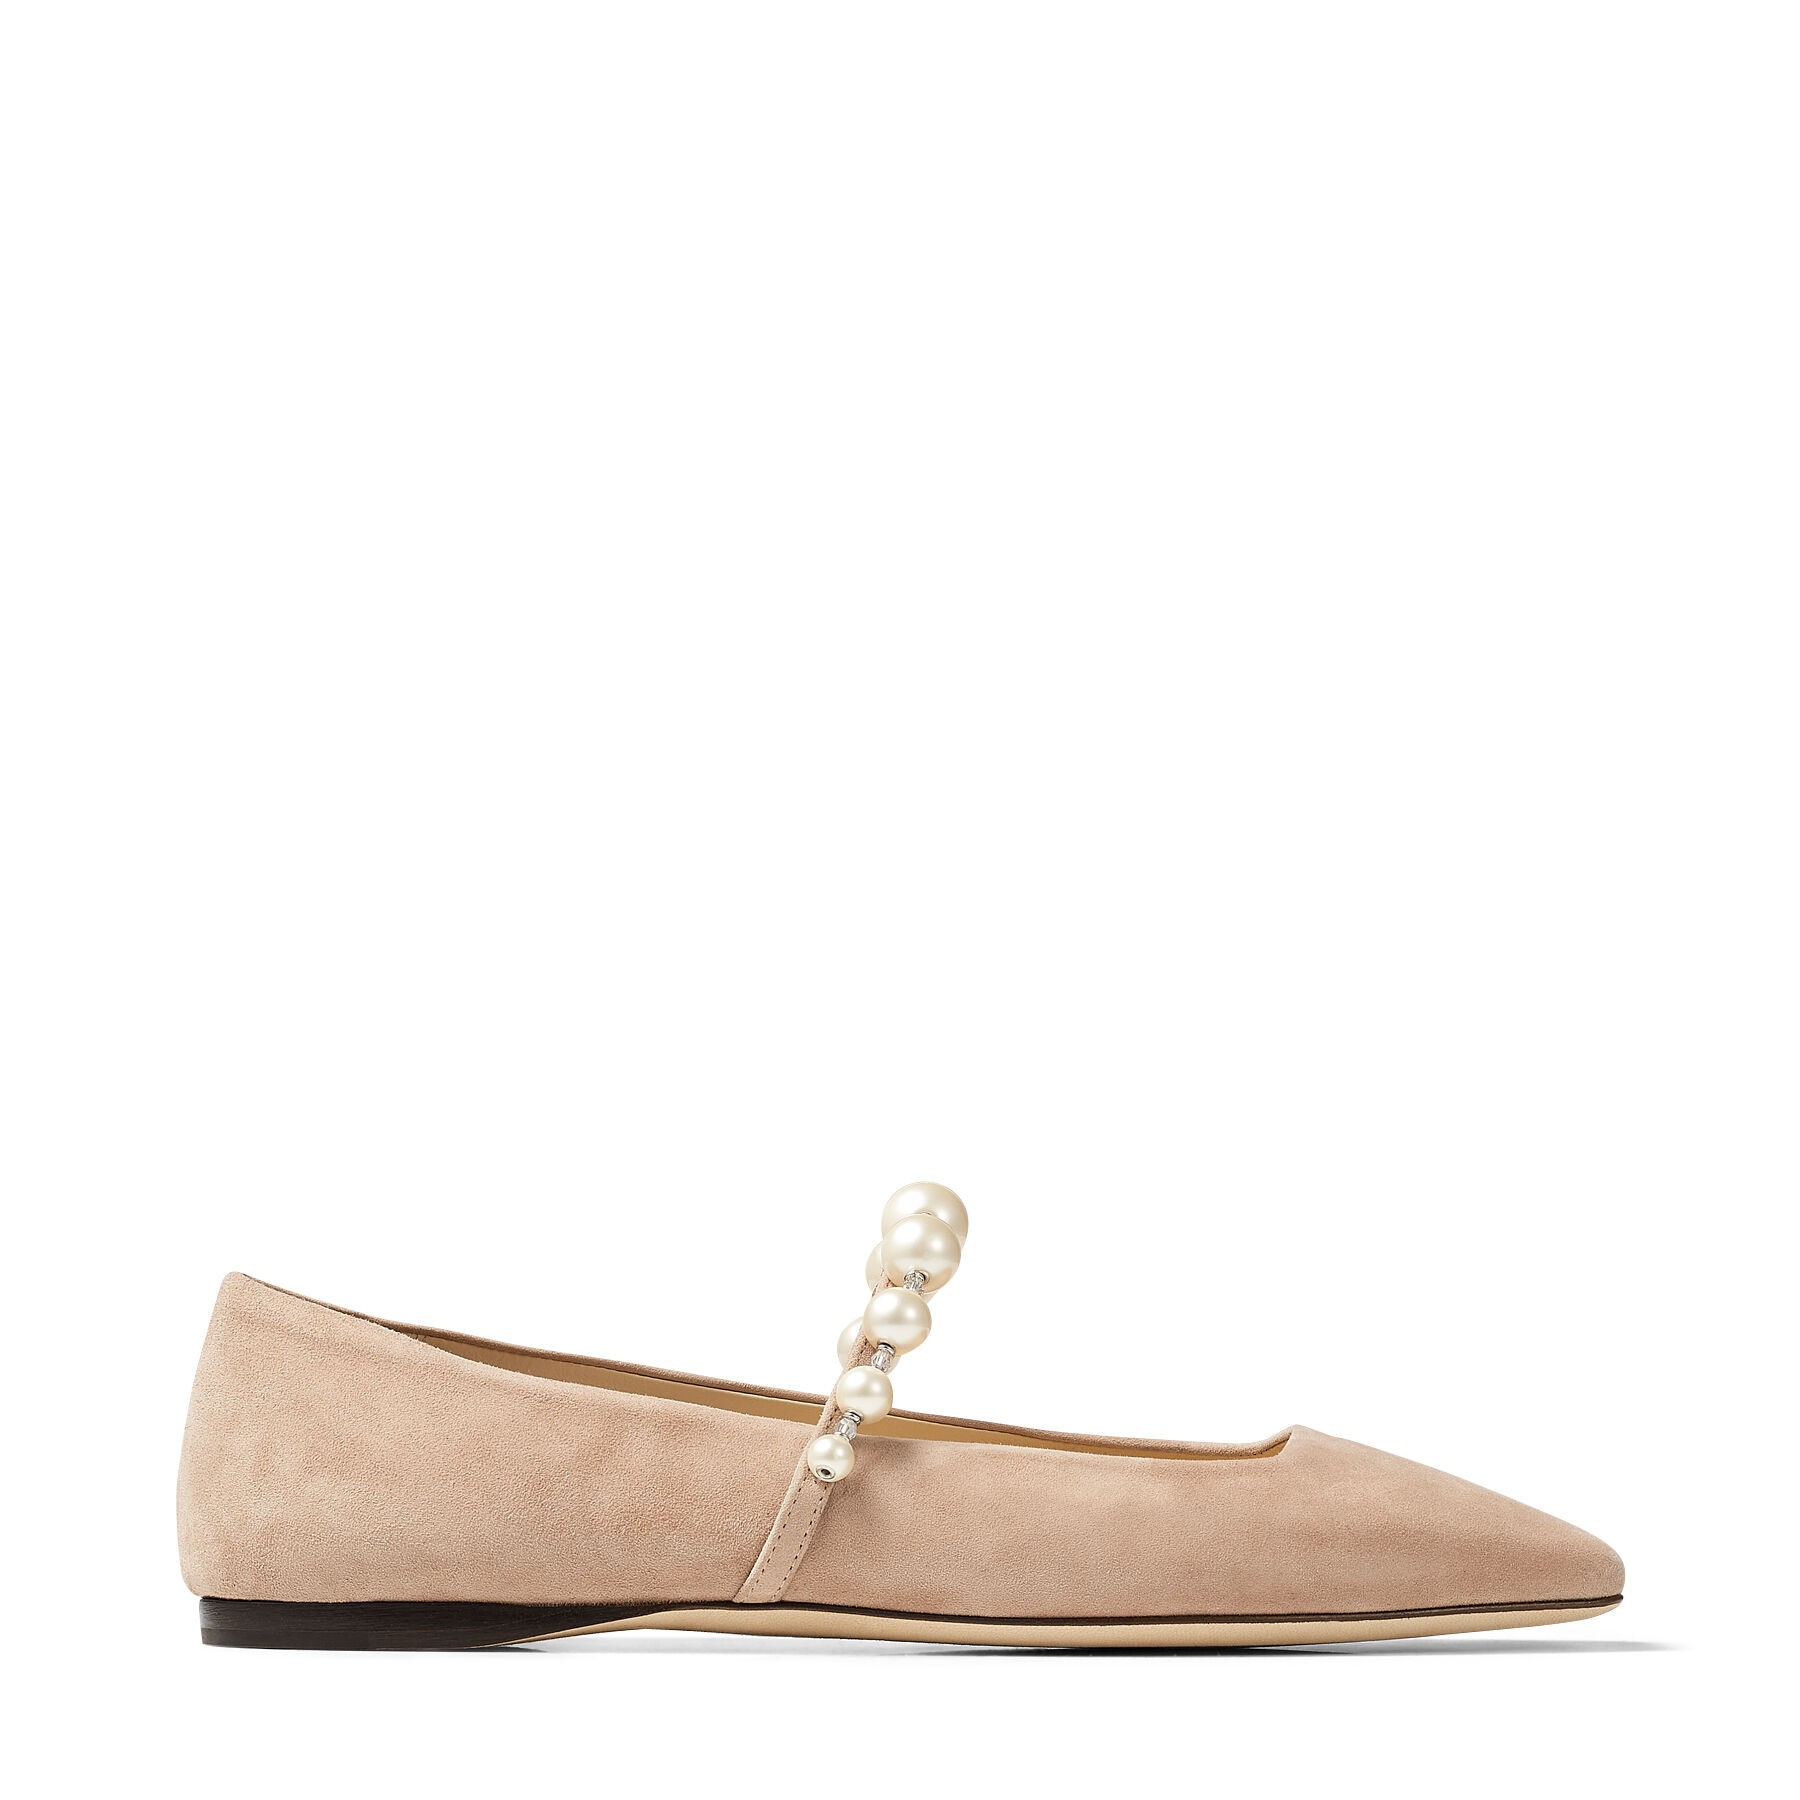 Ballet Pink Suede Flats with Pearl Embellishment | ADE FLAT | High 2021 | JIMMY CHOO